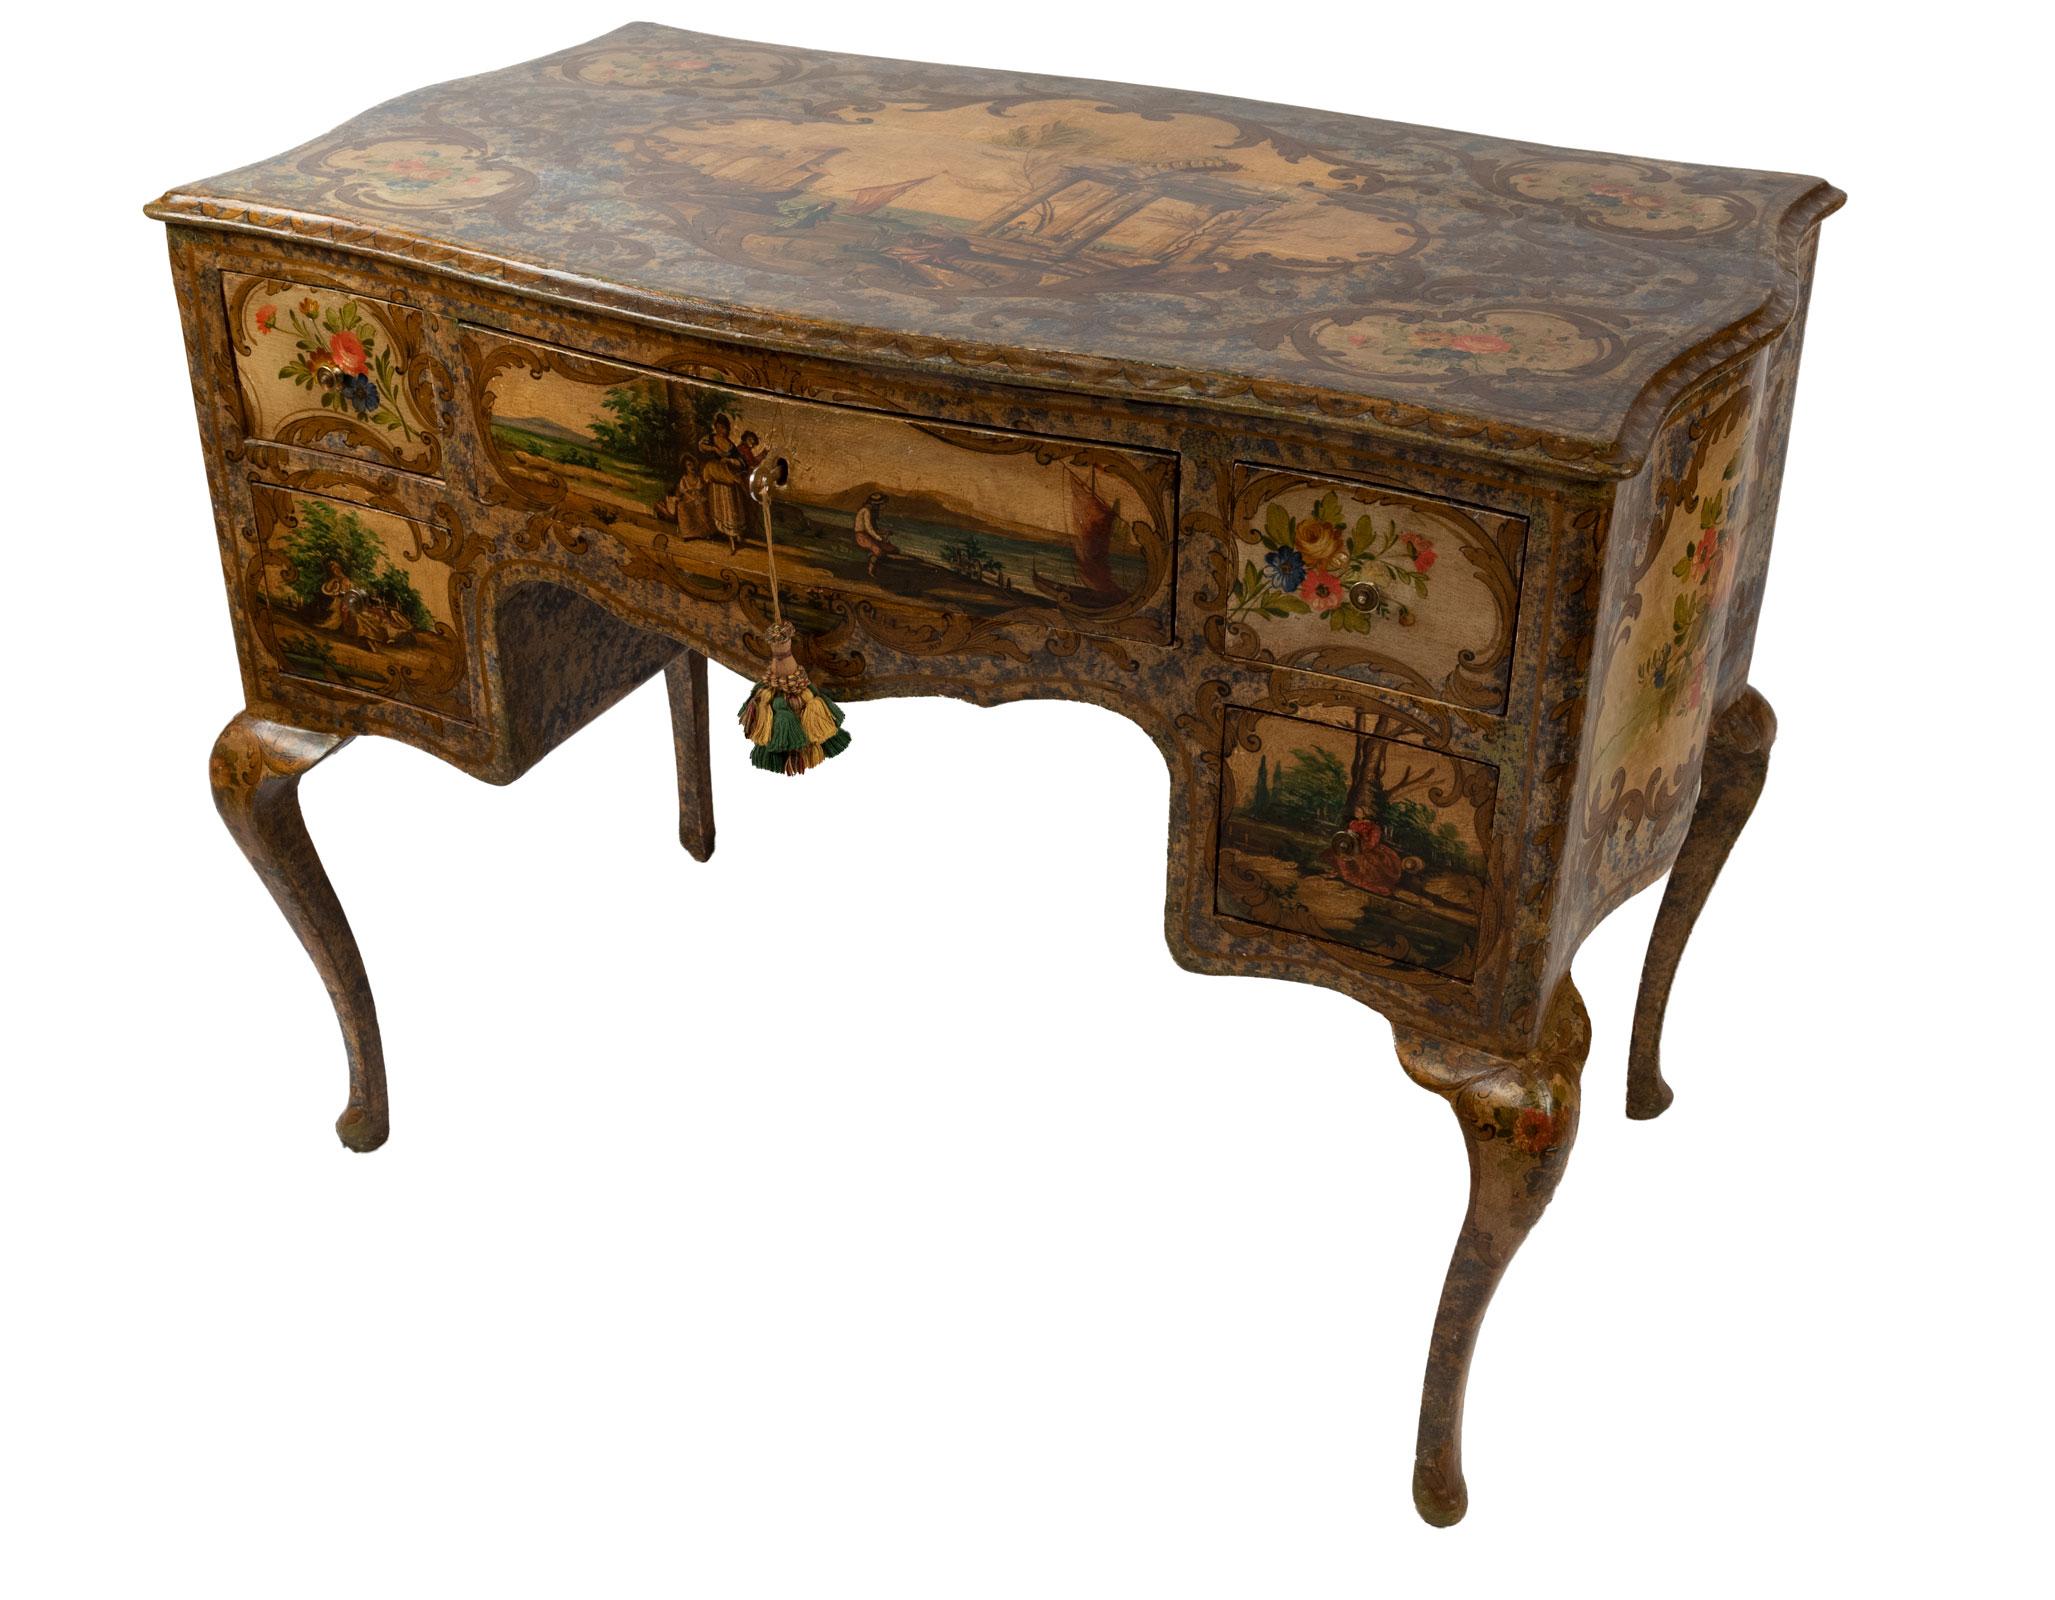 A Venetian knee-hole desk with cabriole legs, painted with scenes of country life, and Grand Tour ruins.